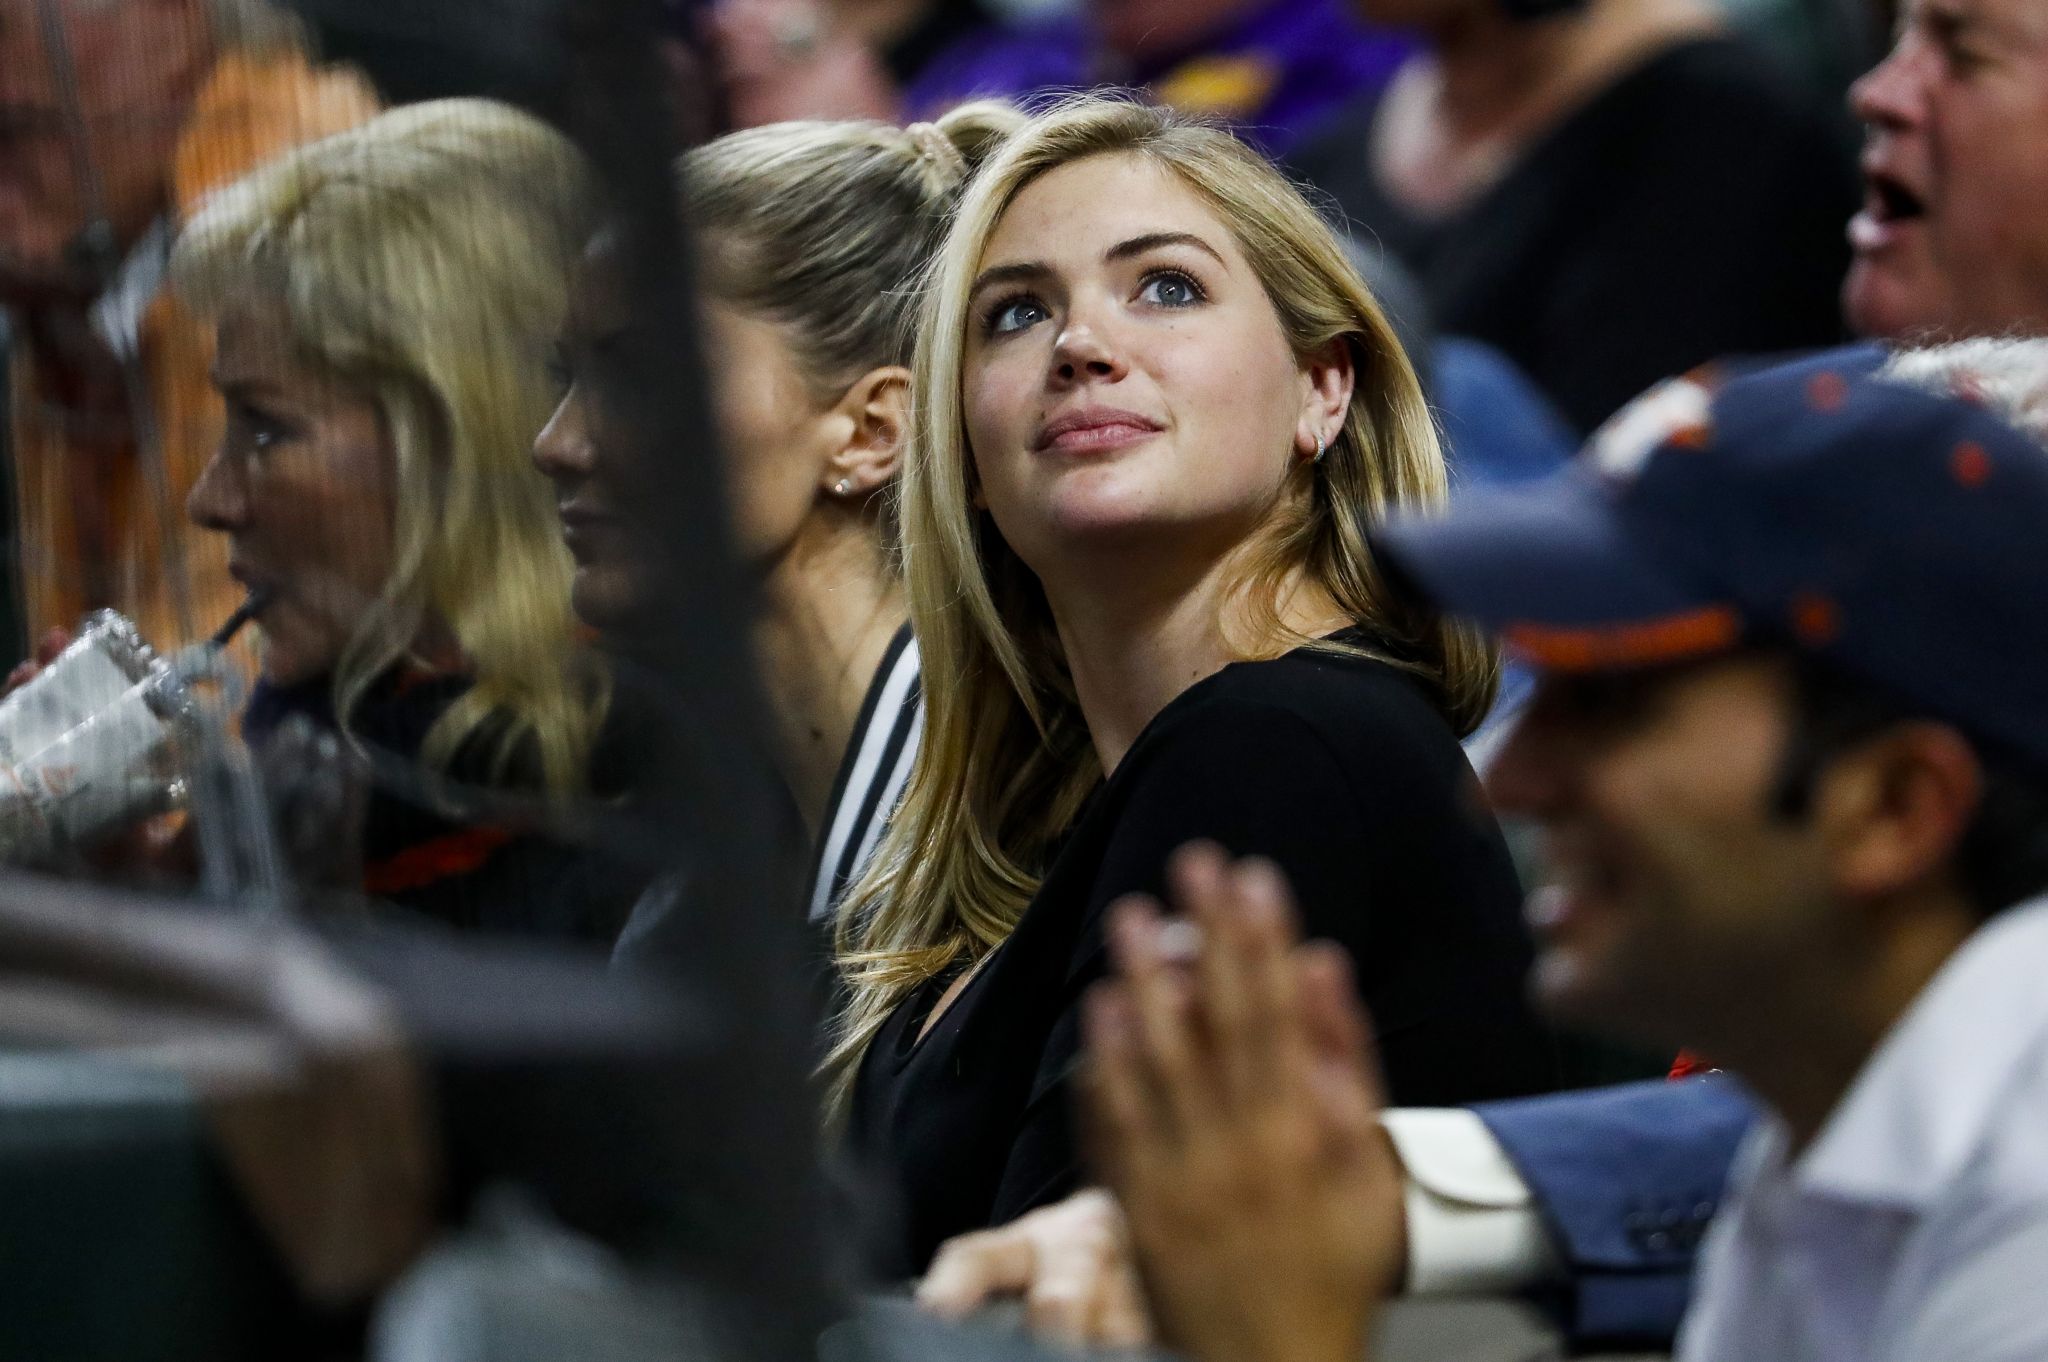 Kate Upton tweets displeasure with umpires from her seat at Astros